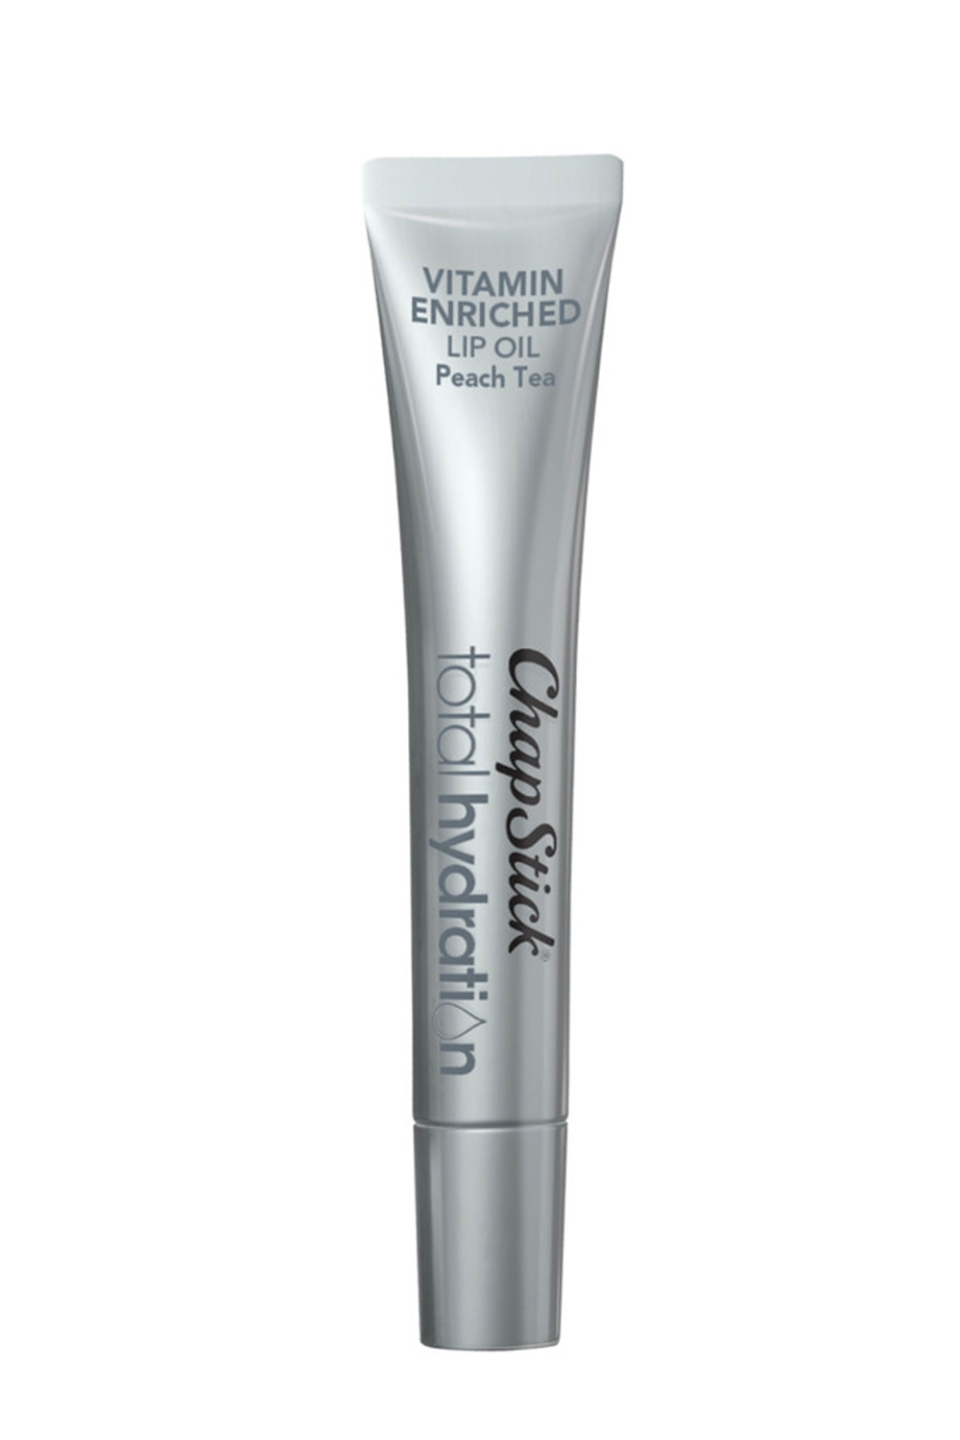 9) ChapStick Total Hydration Vitamin Enriched Lip Oil